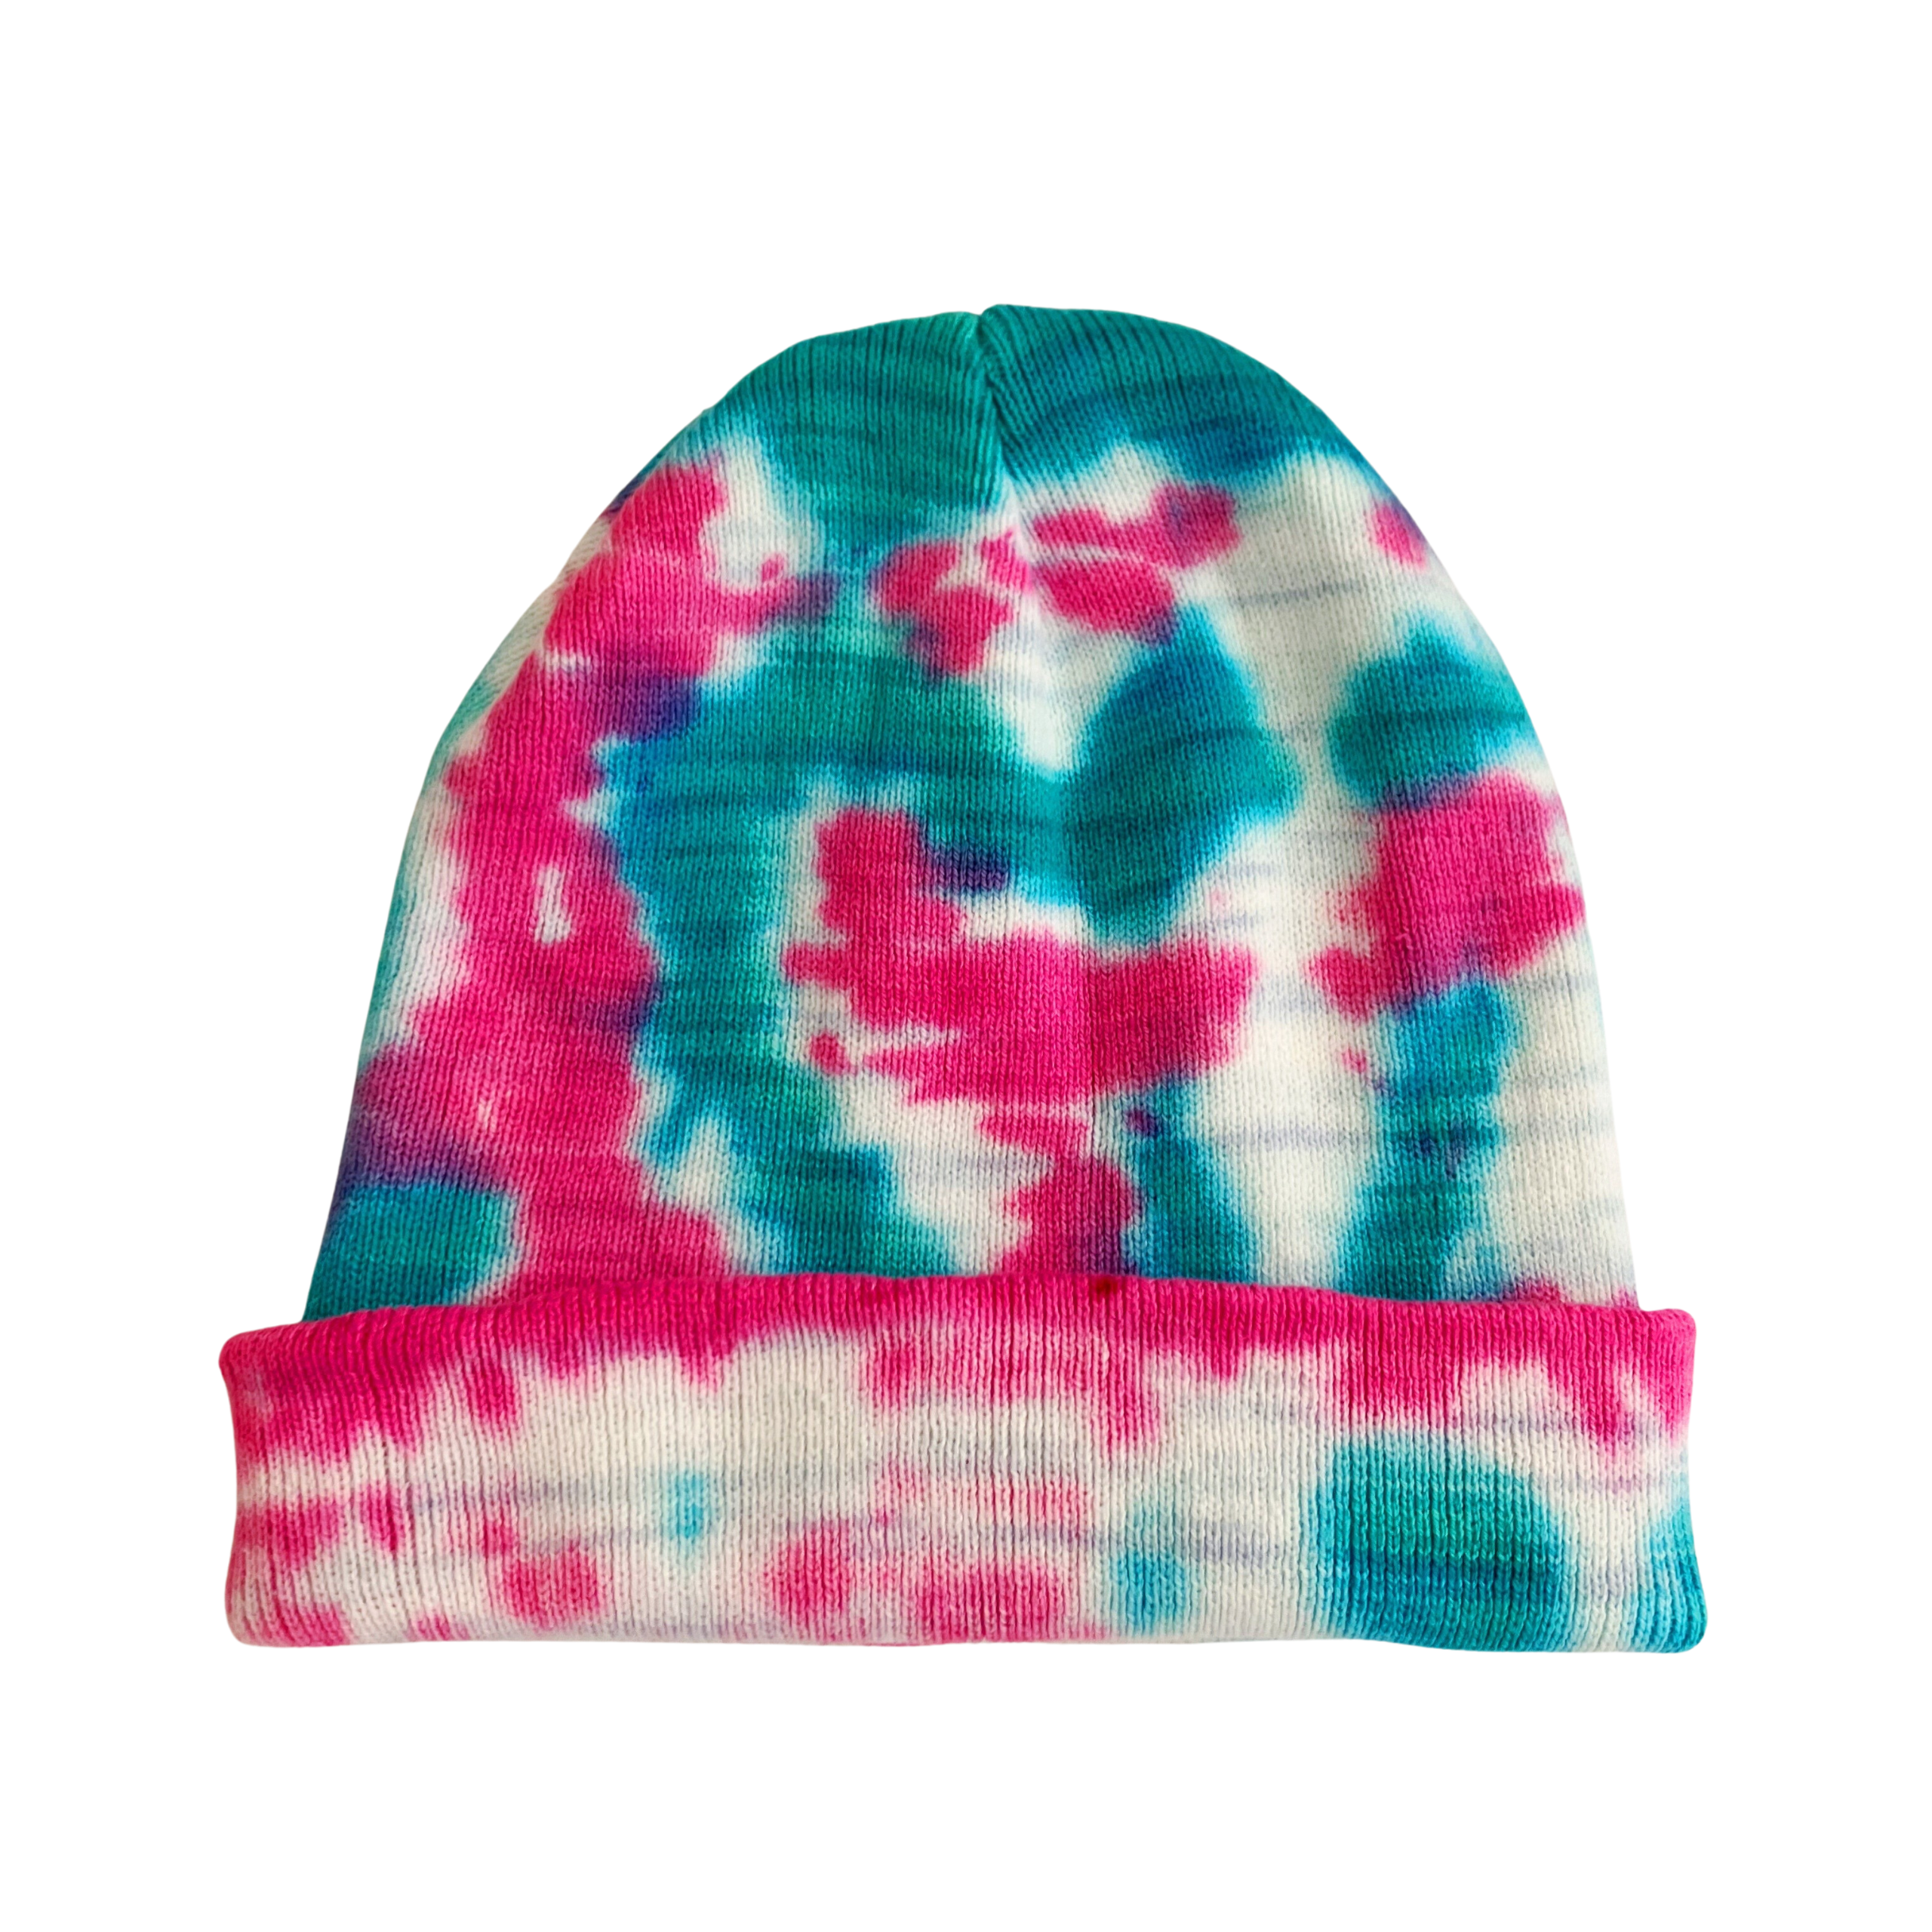 Turquoise and Pink Tie Dye Beanie Hat